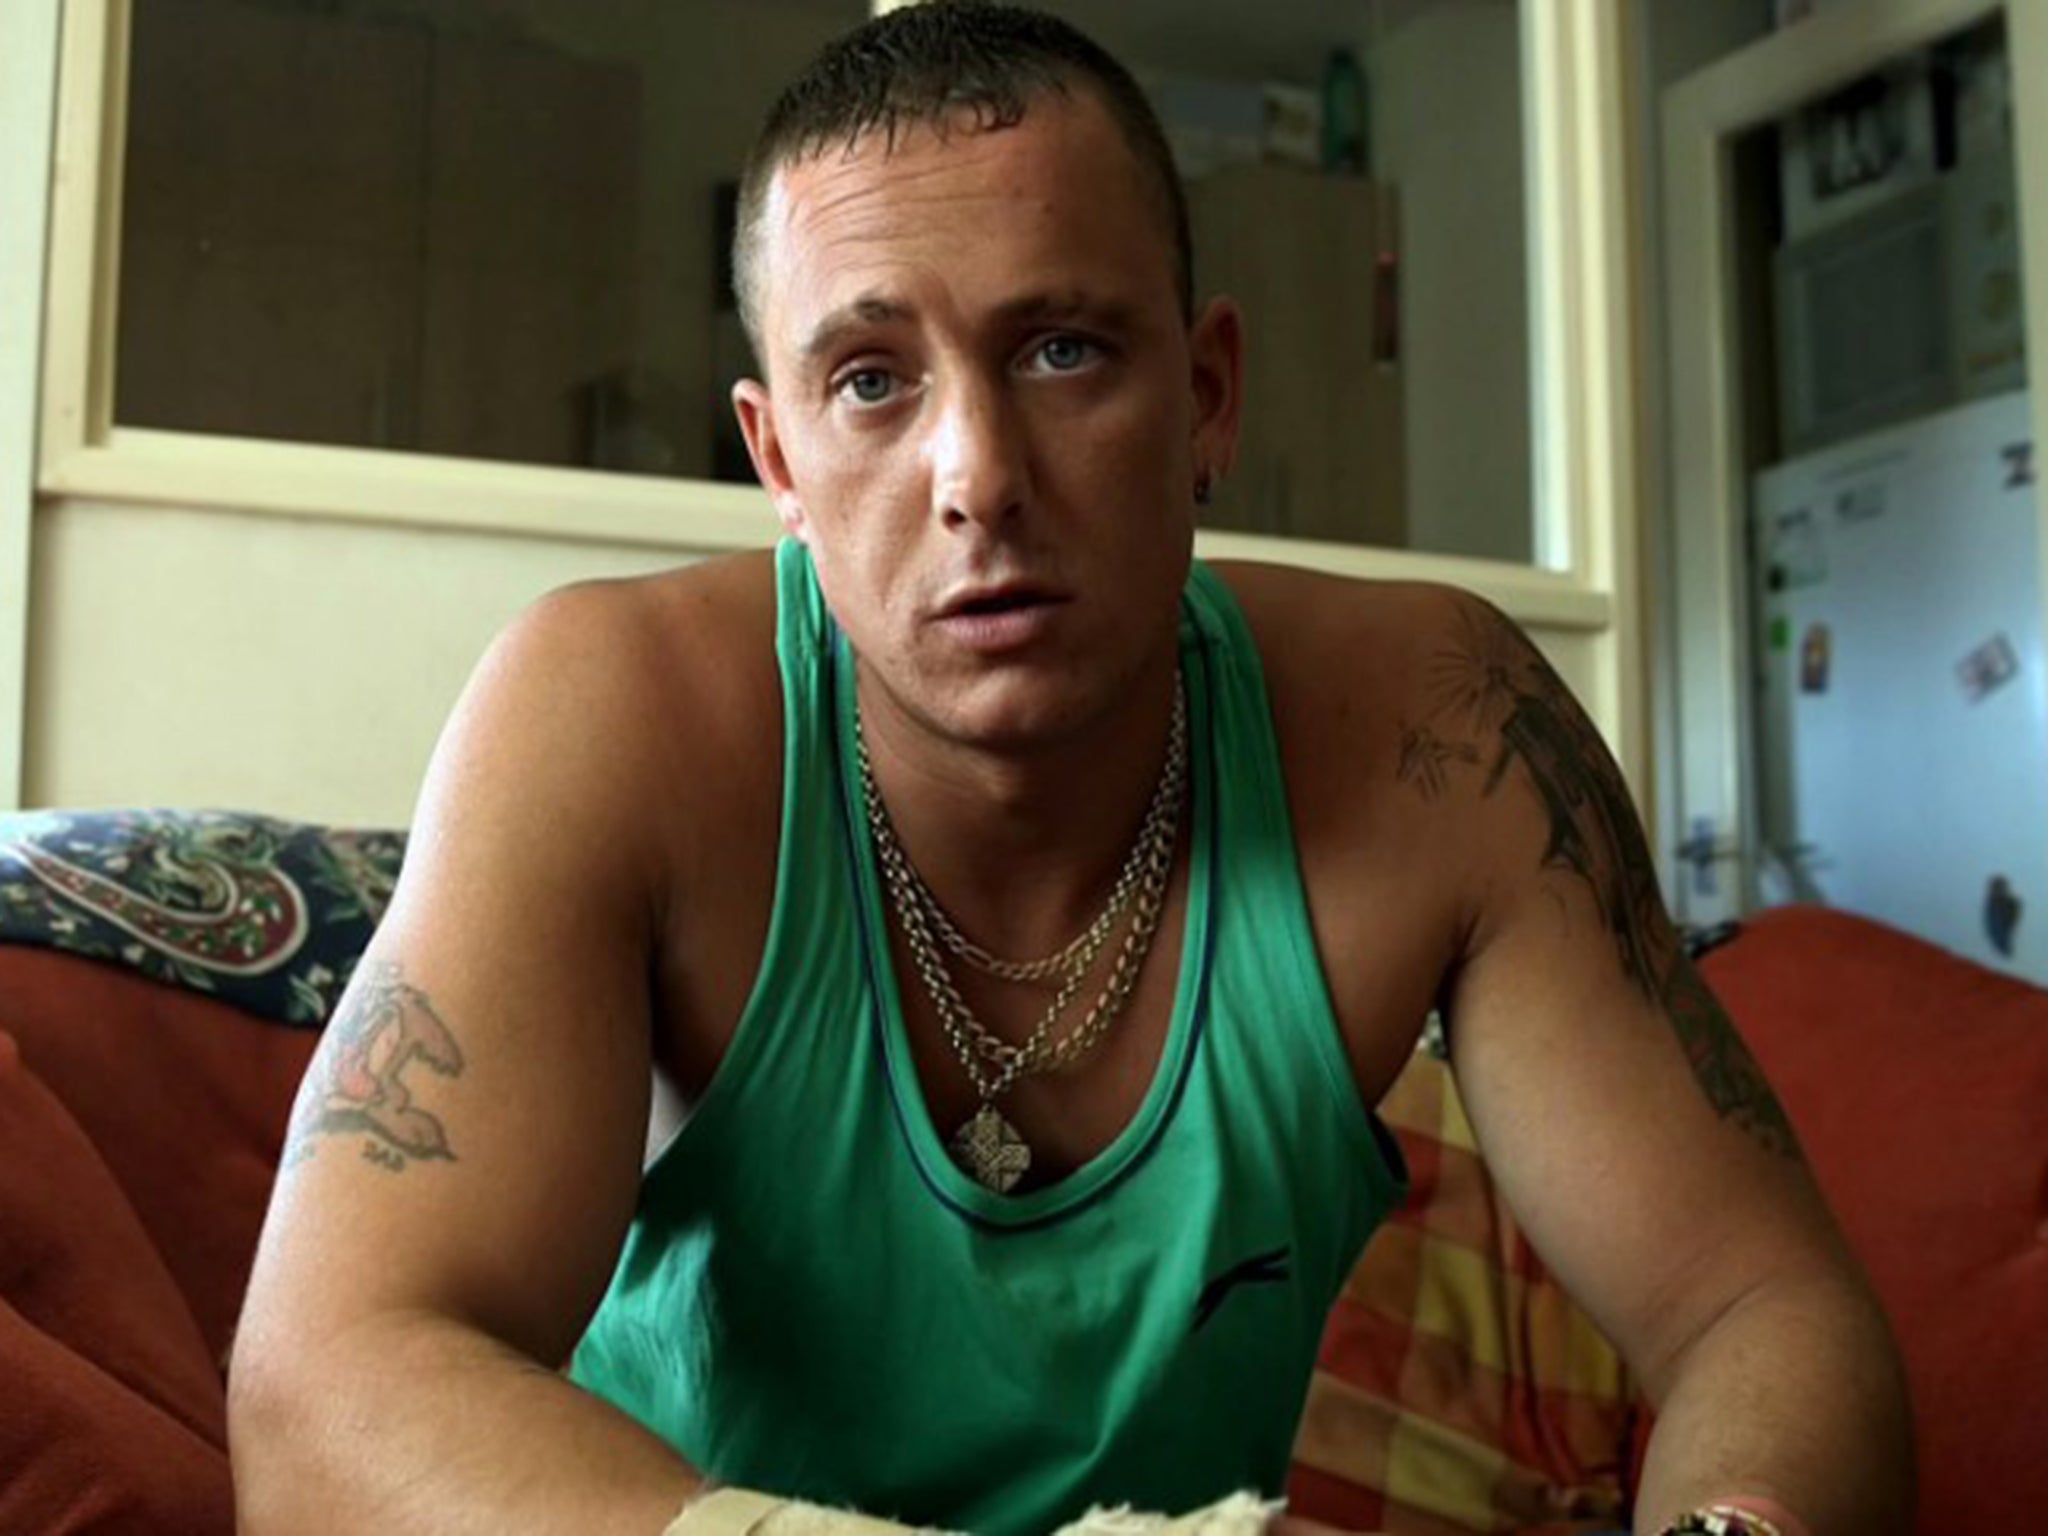 One of Kingston Road's residents, Maxwell, is trying to move on in life after several spells in prison for dealing drugs